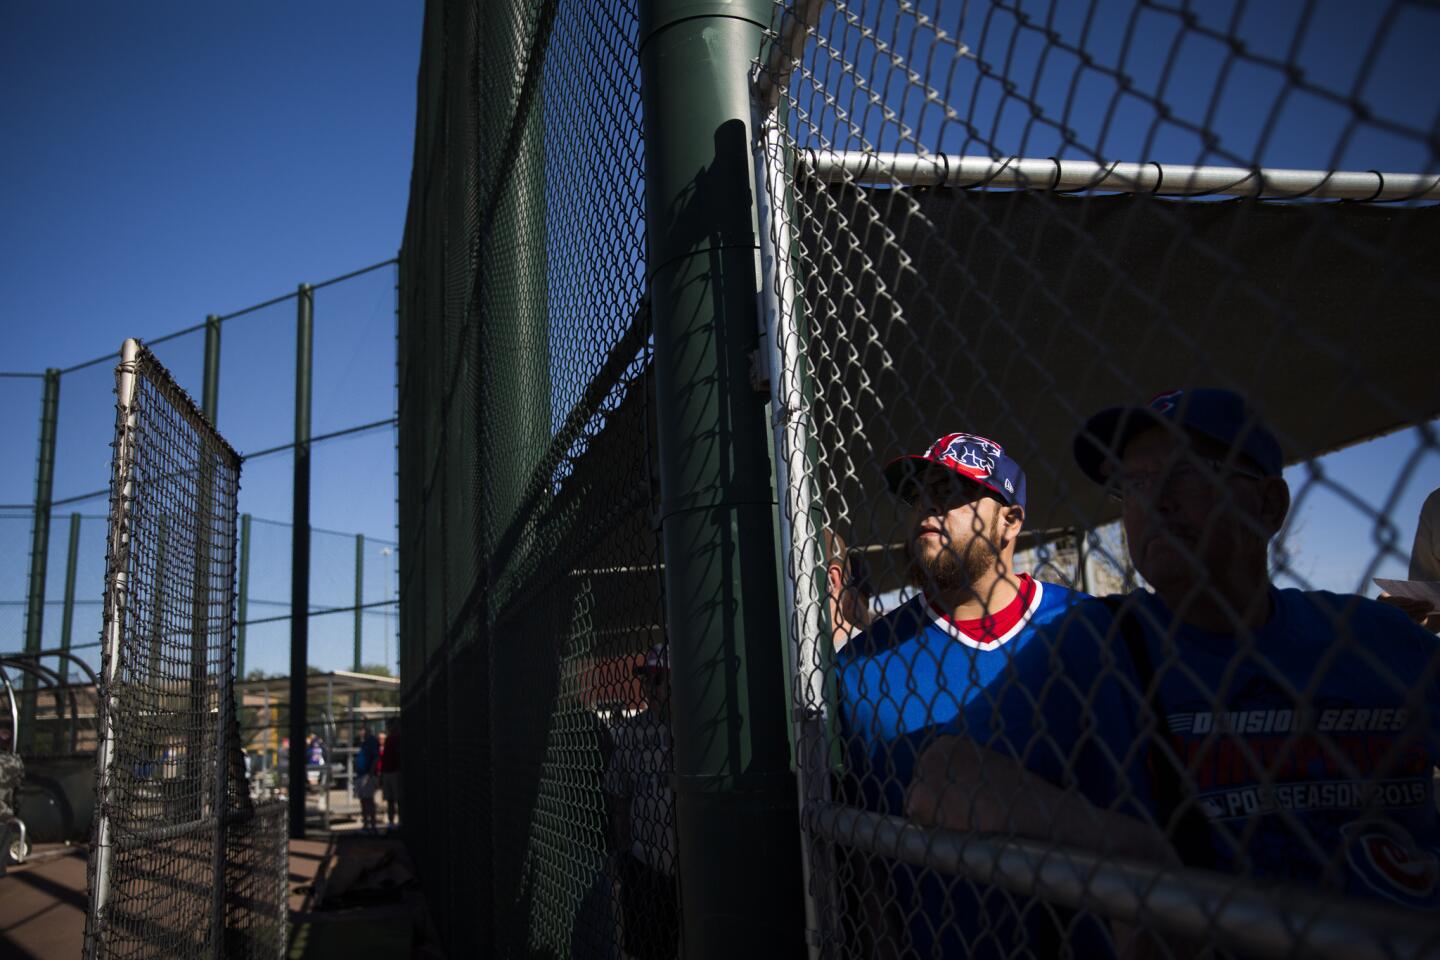 Cesar Arrecis, 30, watches Cubs players practice during spring training, Feb. 25, 2016.